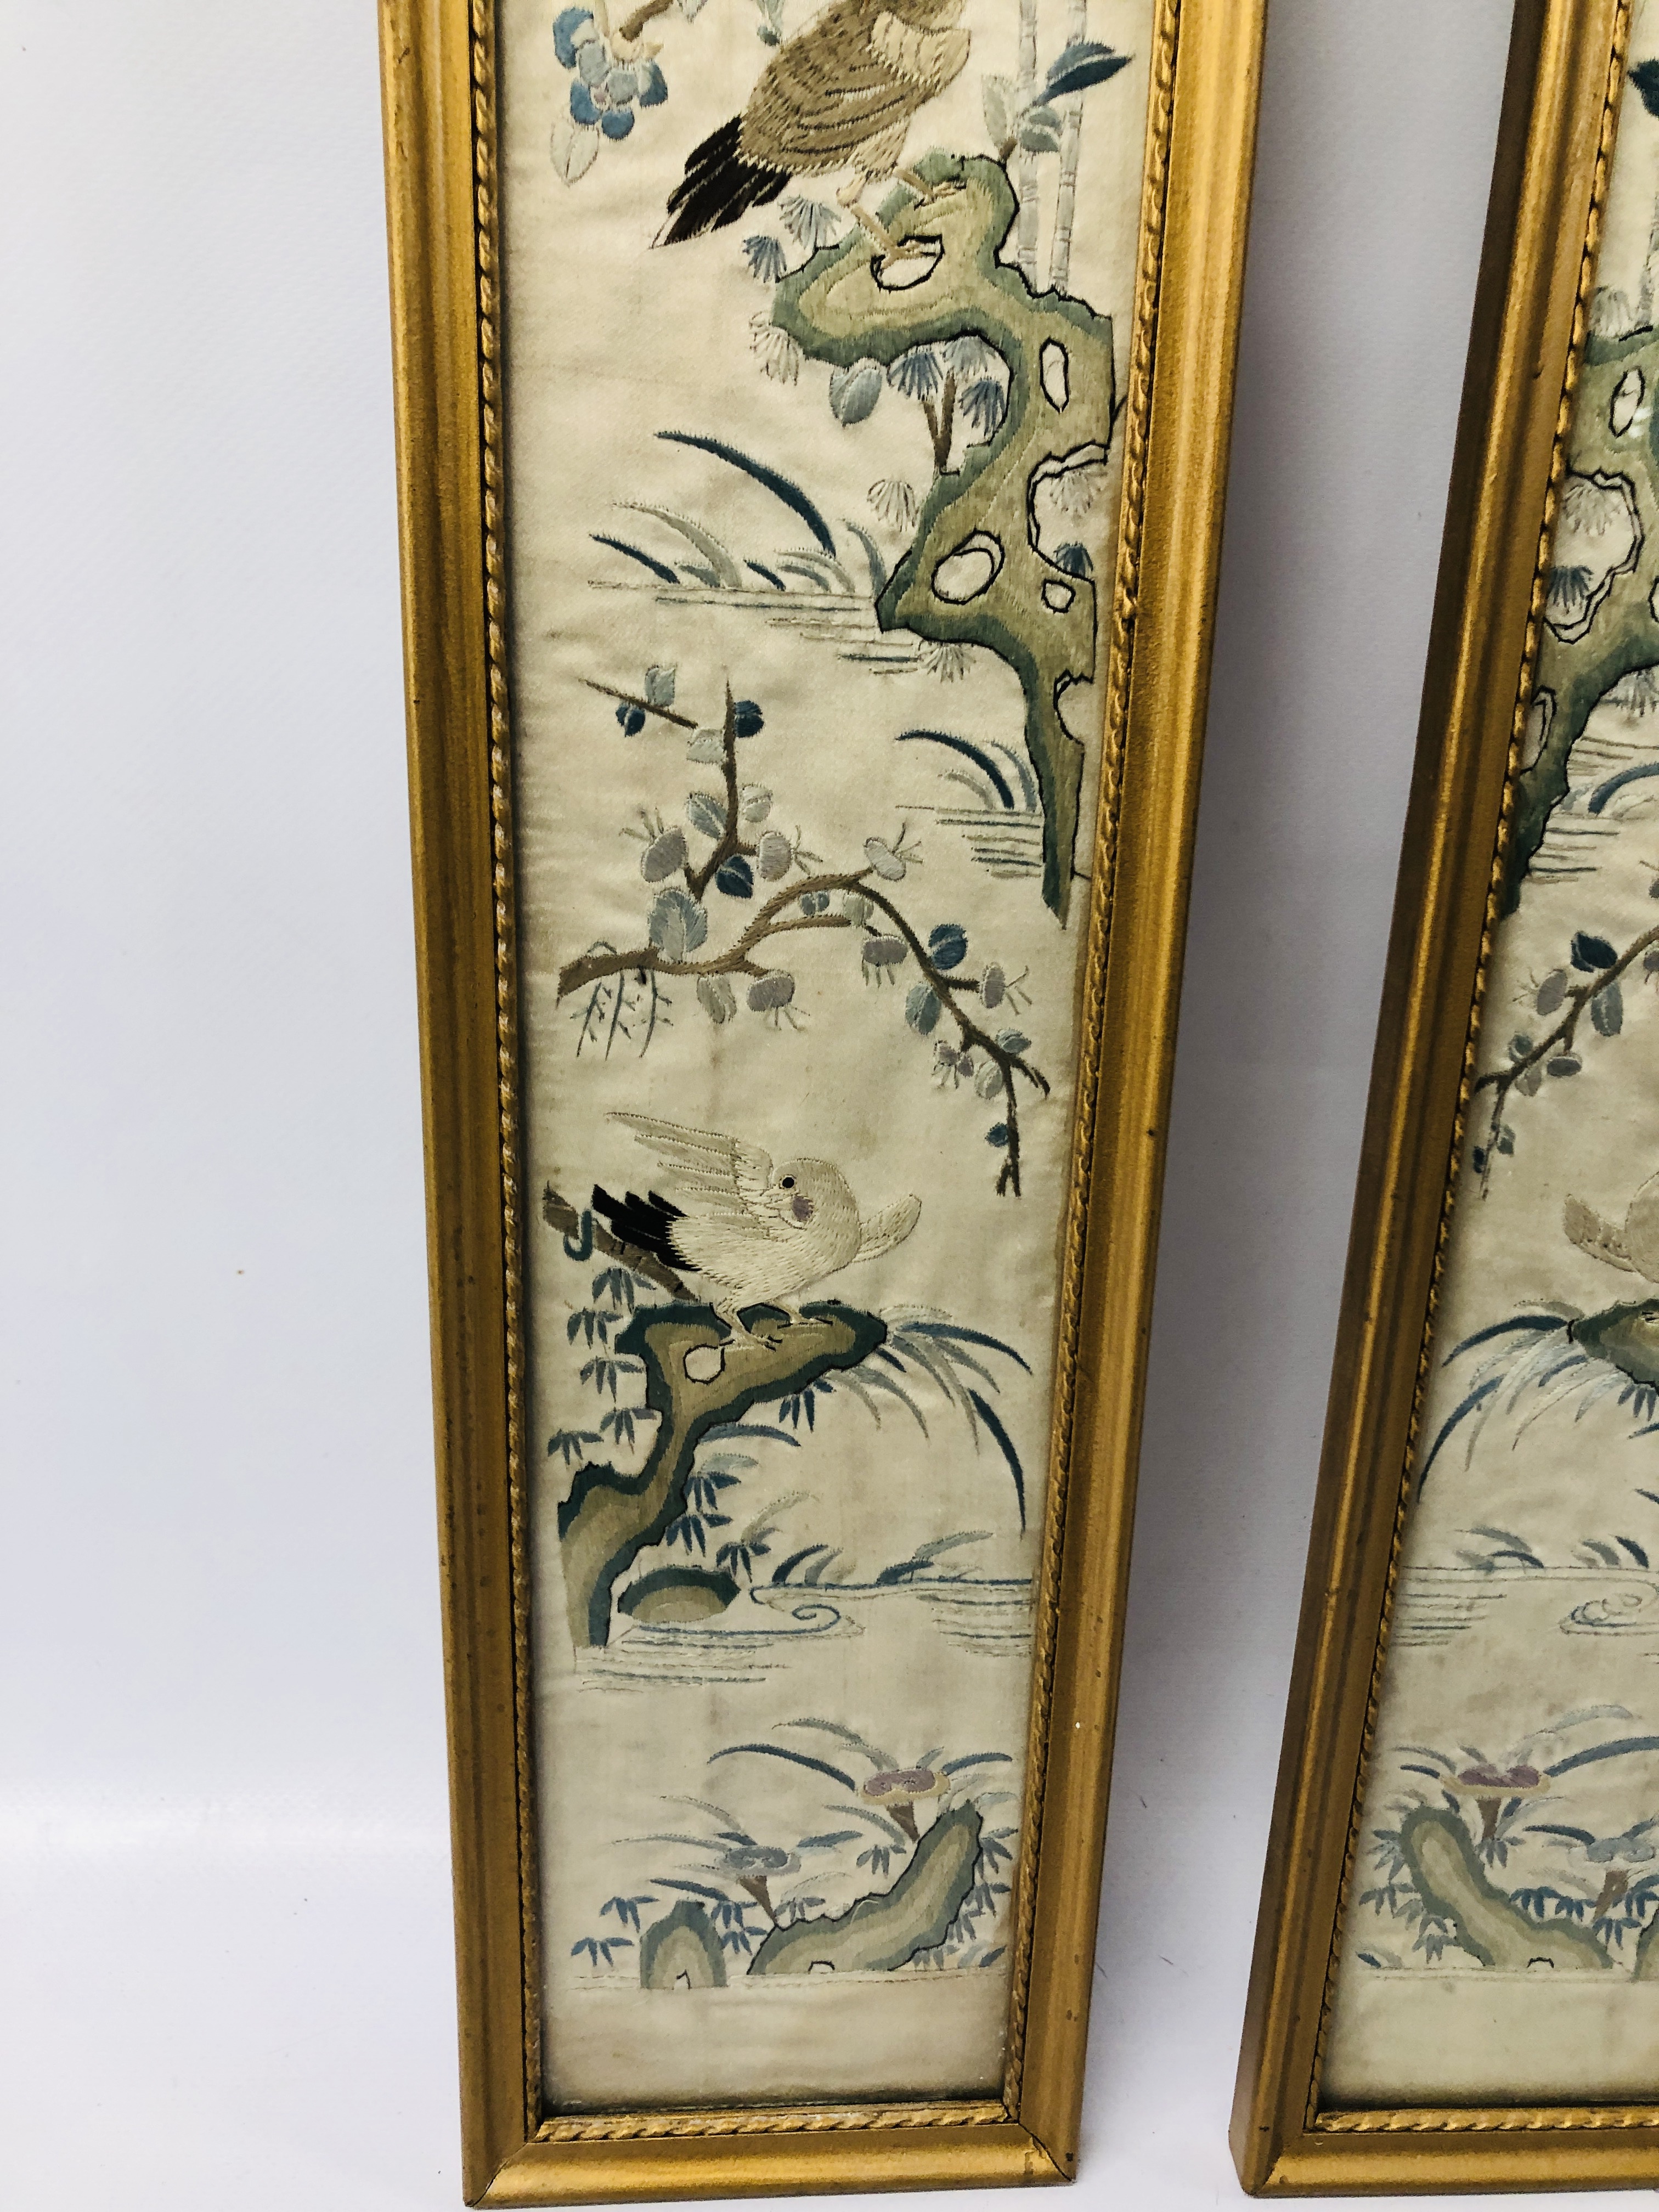 A PAIR OF C19TH CHINESE EMBROIDERIES OF BIRDS, ROCKS AND TREES EACH 54 X 9CM. - Image 3 of 5